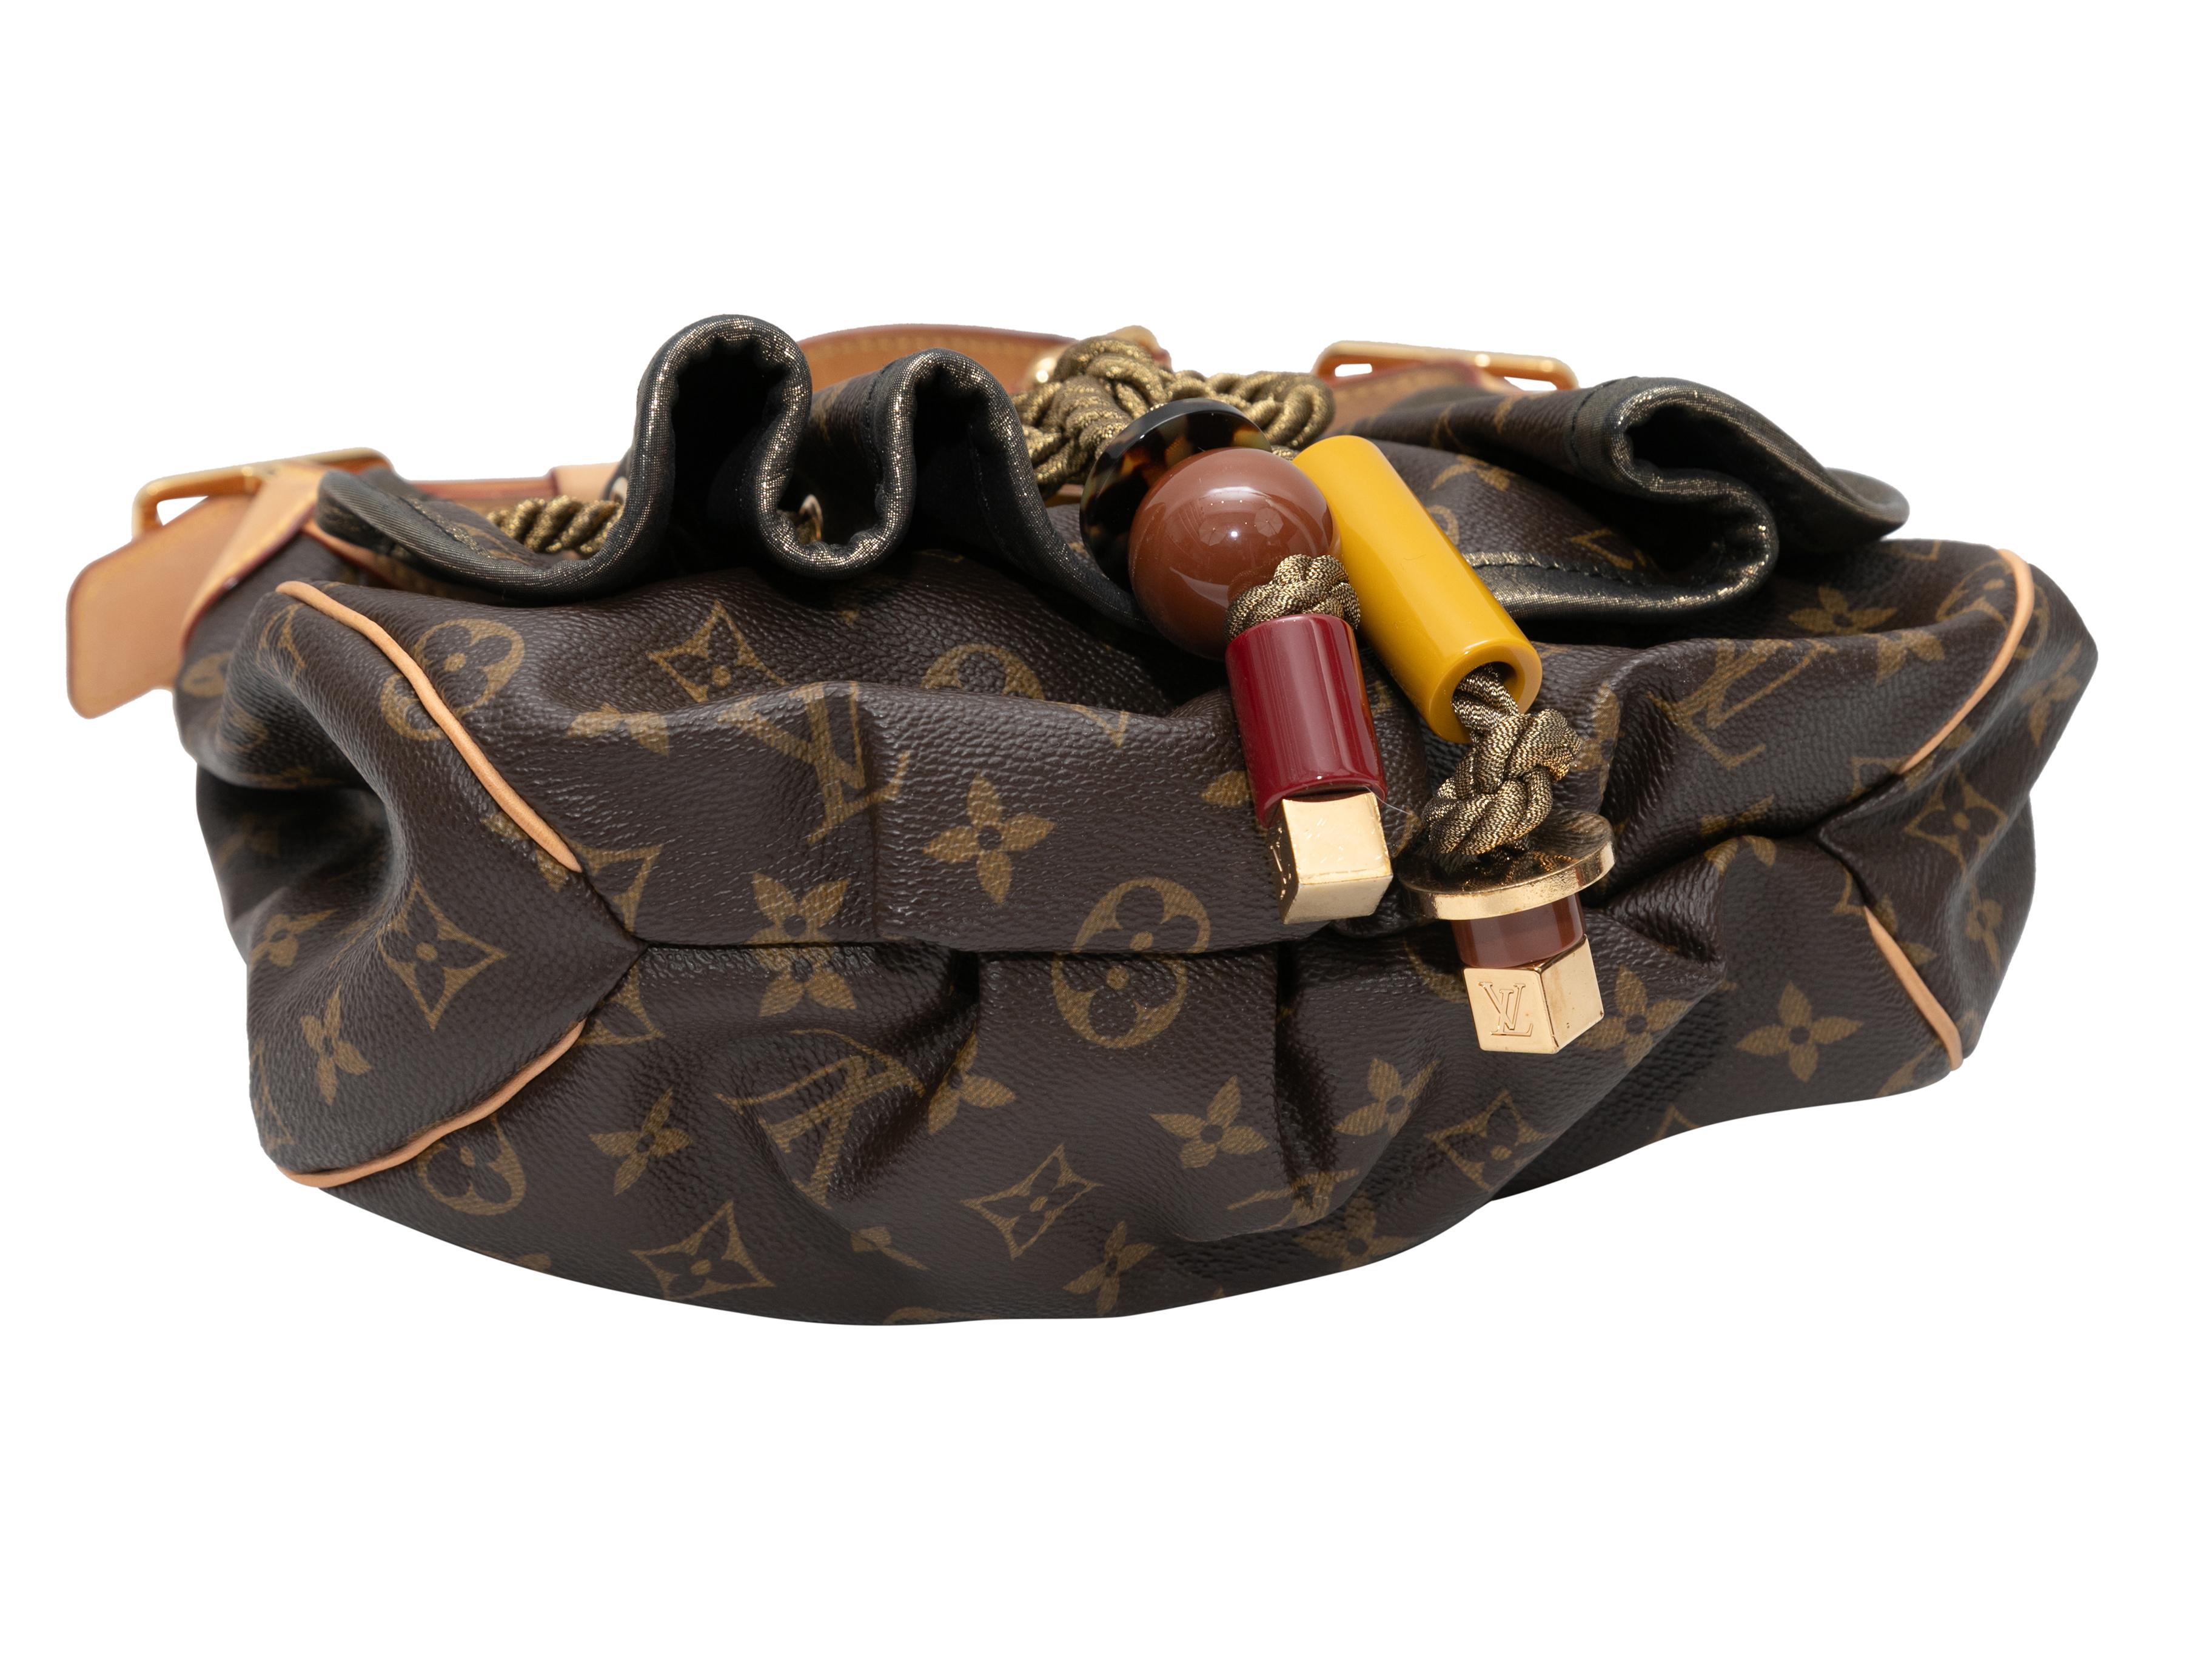 Brown Louis Vuitton Monogram Kalahari PM Bag. The Kalahari PM bag features a monogram coated canvas body, gold-tone hardware, an acrylic bead-accented from flap, a single shoulder strap, and a front closure. 12